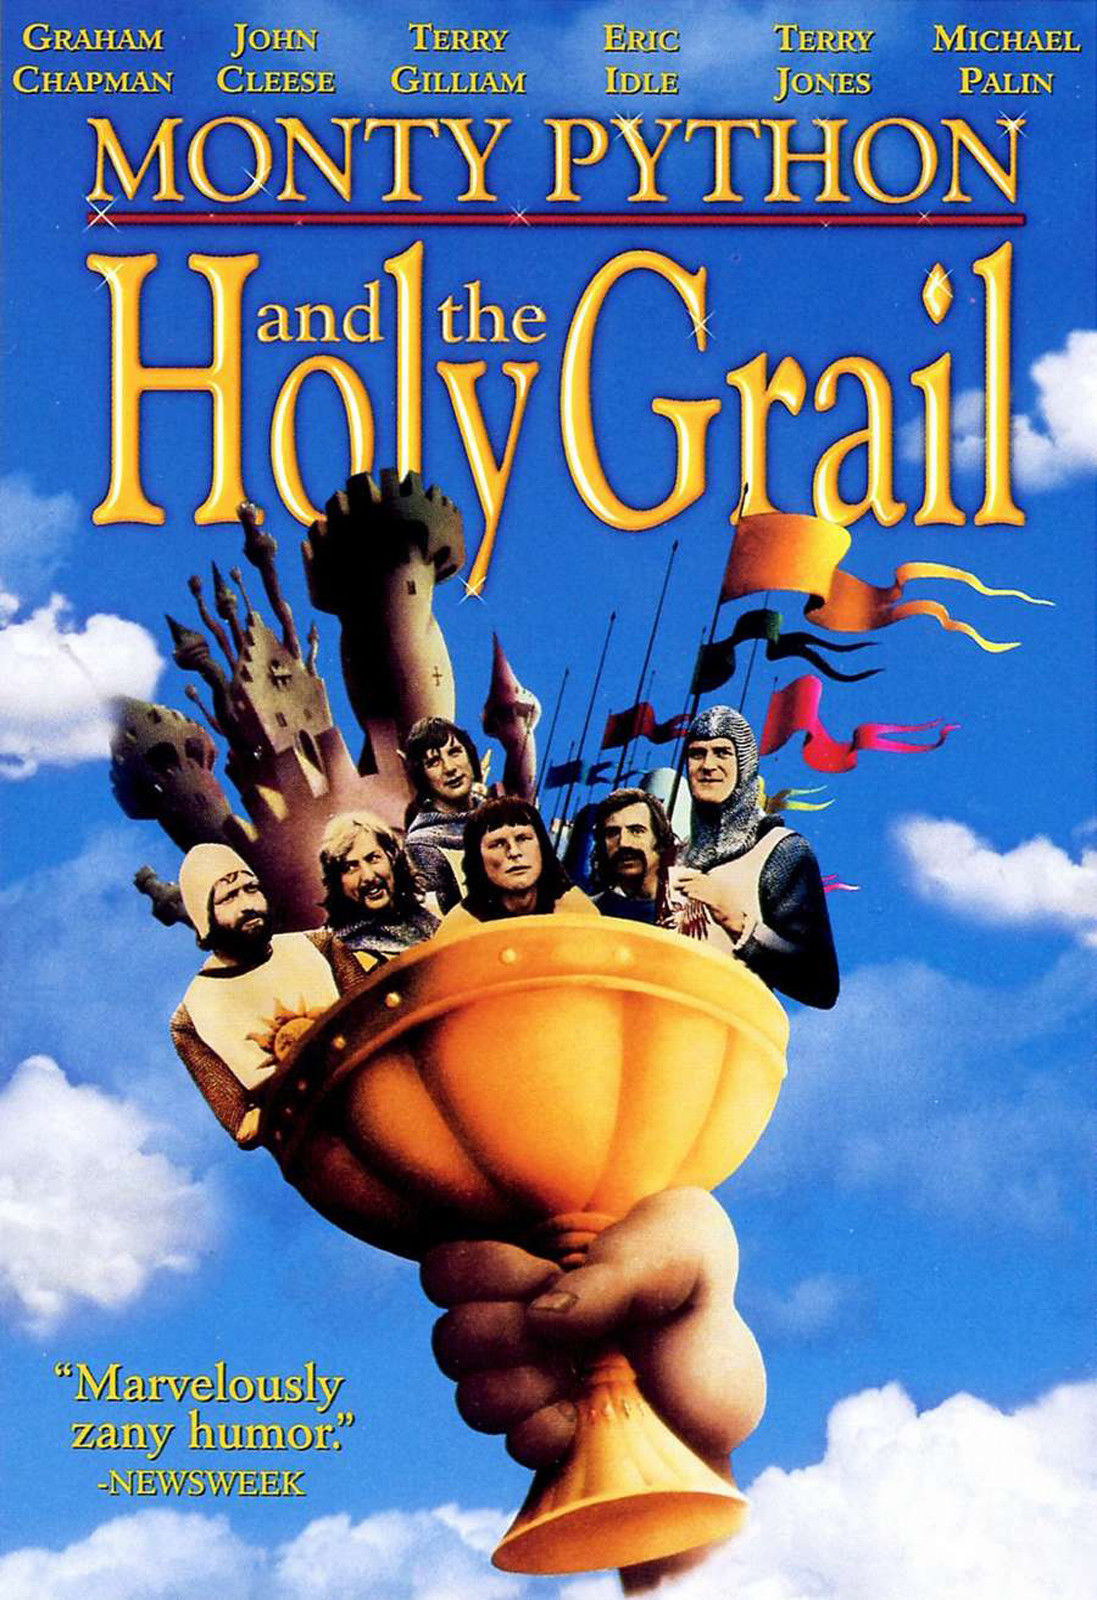 Photo 7 - 61047 MONTY PYTHON AND THE HOLY GRAIL Wall POSTER Print Affiche